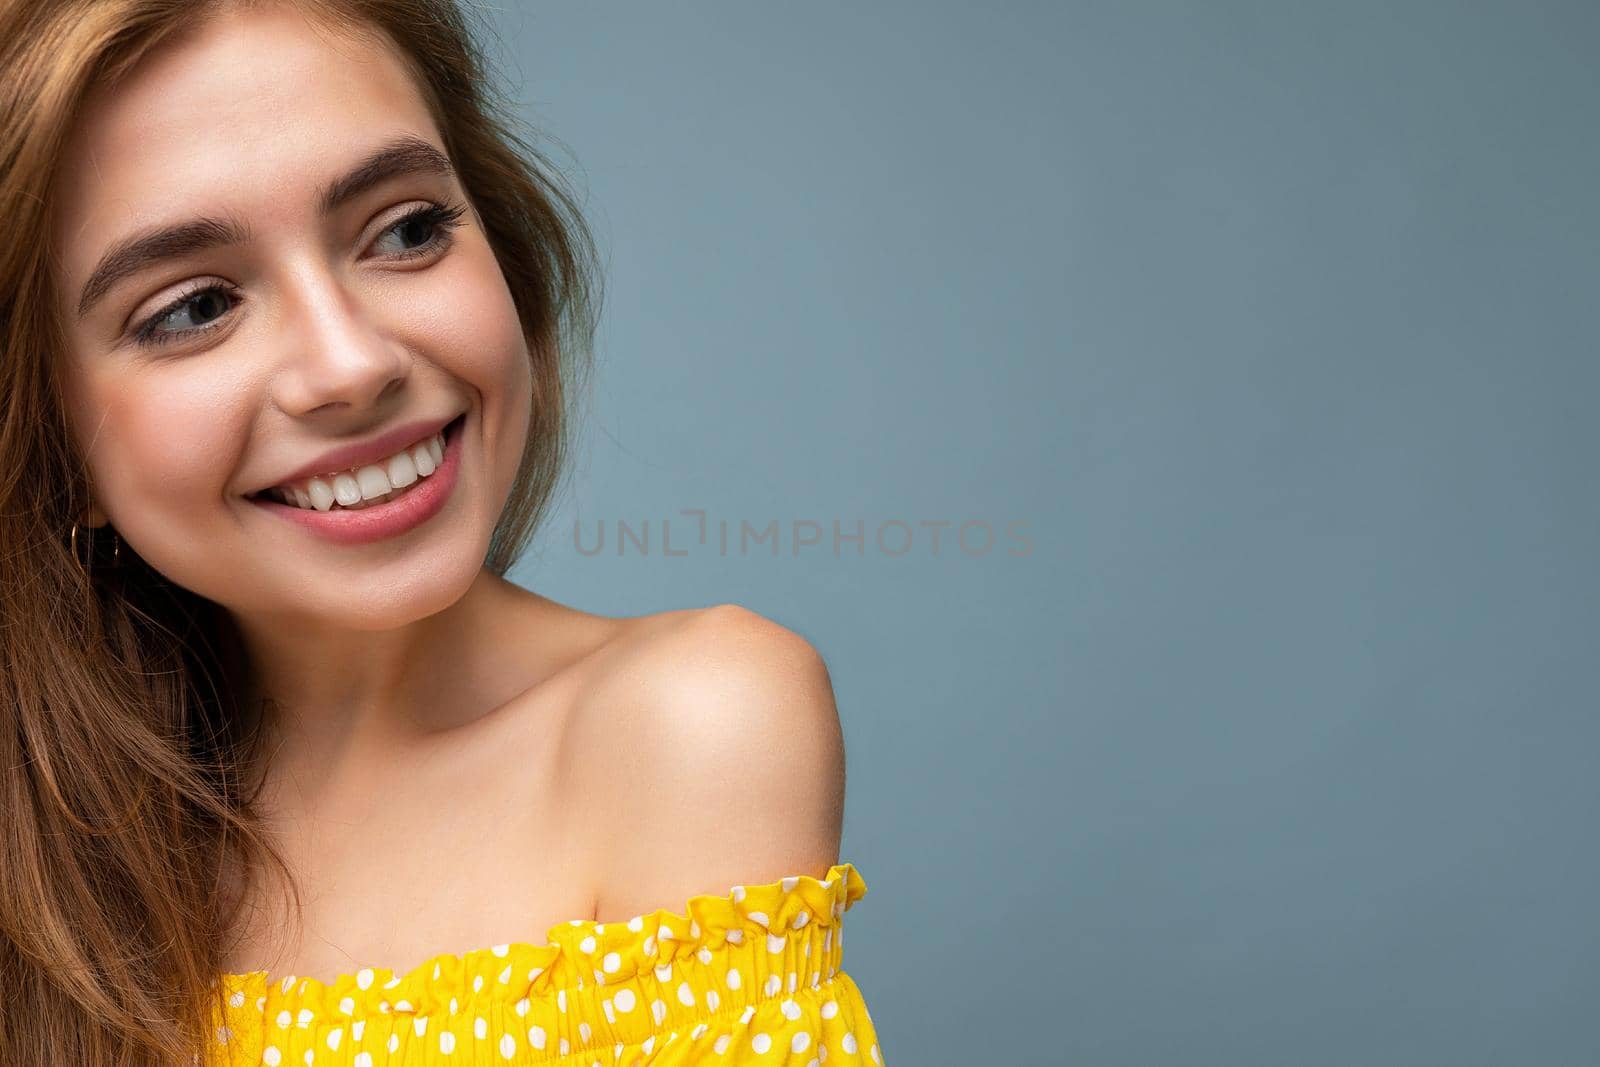 Closeup photo of young smiling cute beautiful dark blonde woman with sincere emotions isolated on background wall with copy space wearing stylish summer yellow dress. Positive concept.